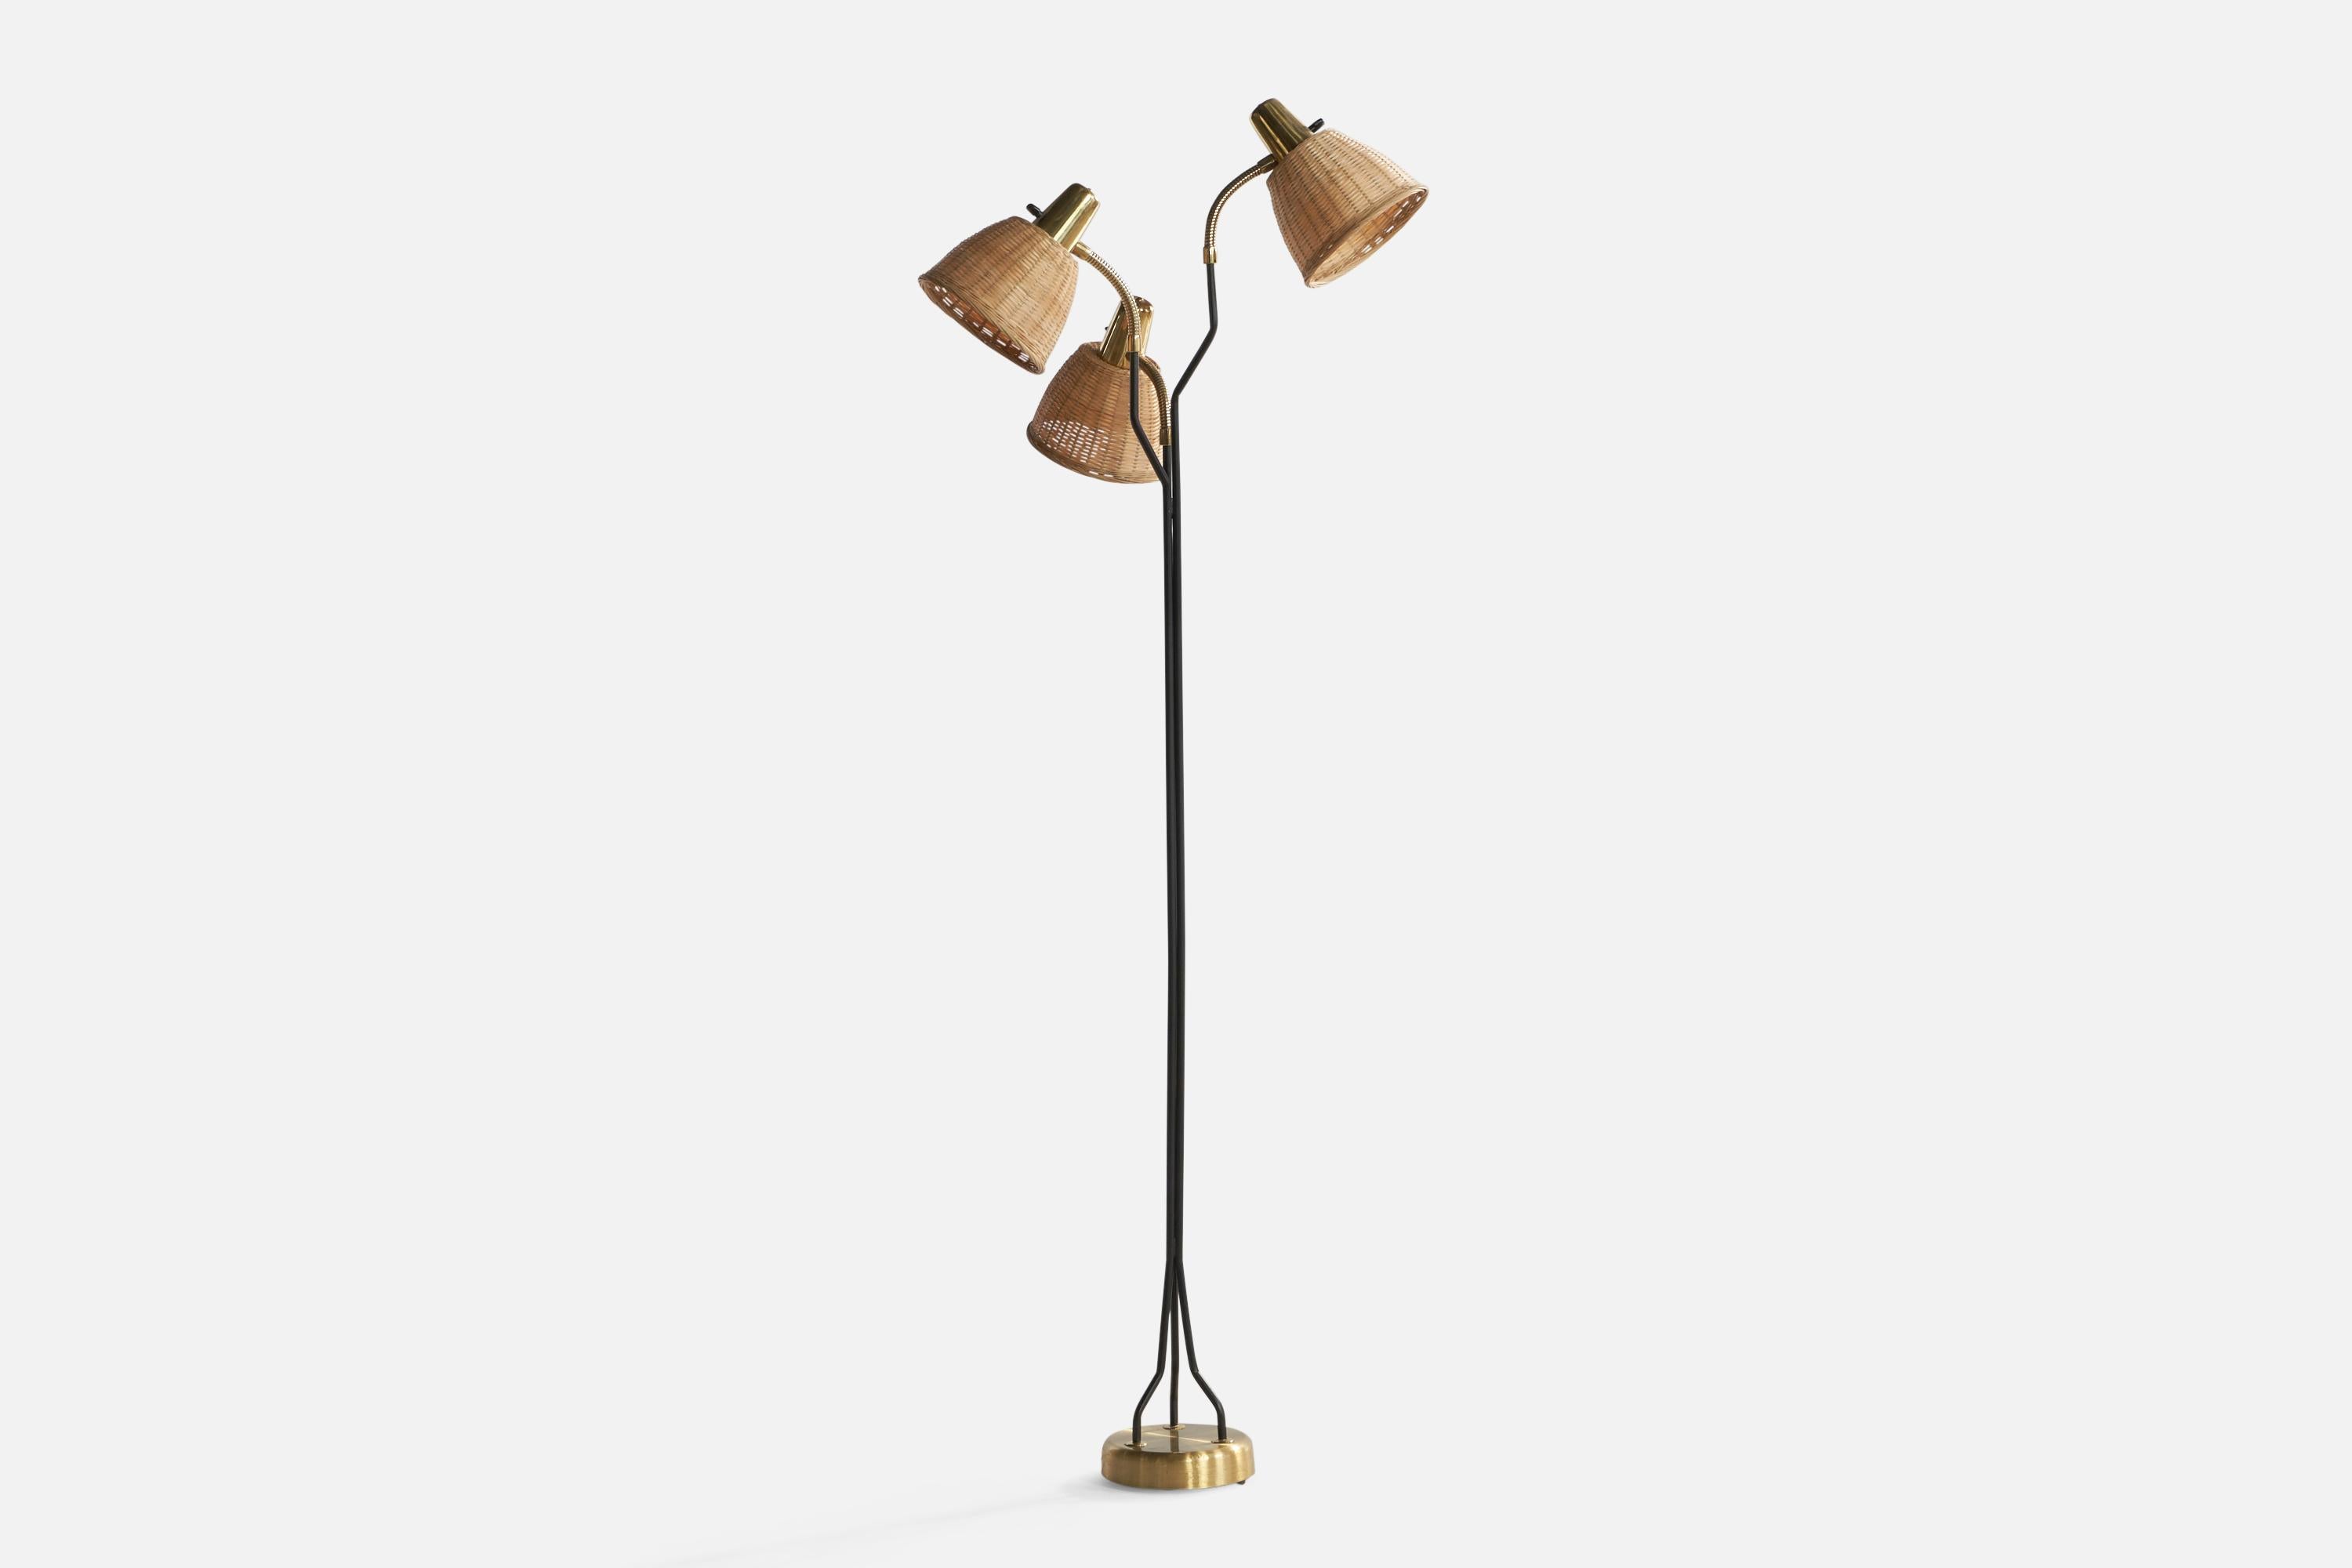 An adjustable three-armed brass, black-lacquered metal and rattan floor lamp, designed and produced by Eskilstuna Elektrofabrik Aktiebolag, Sweden, c. 1960s.

Overall Dimensions (inches): 61.68” H x 20.8” W x 20.8” D. Stated dimensions include